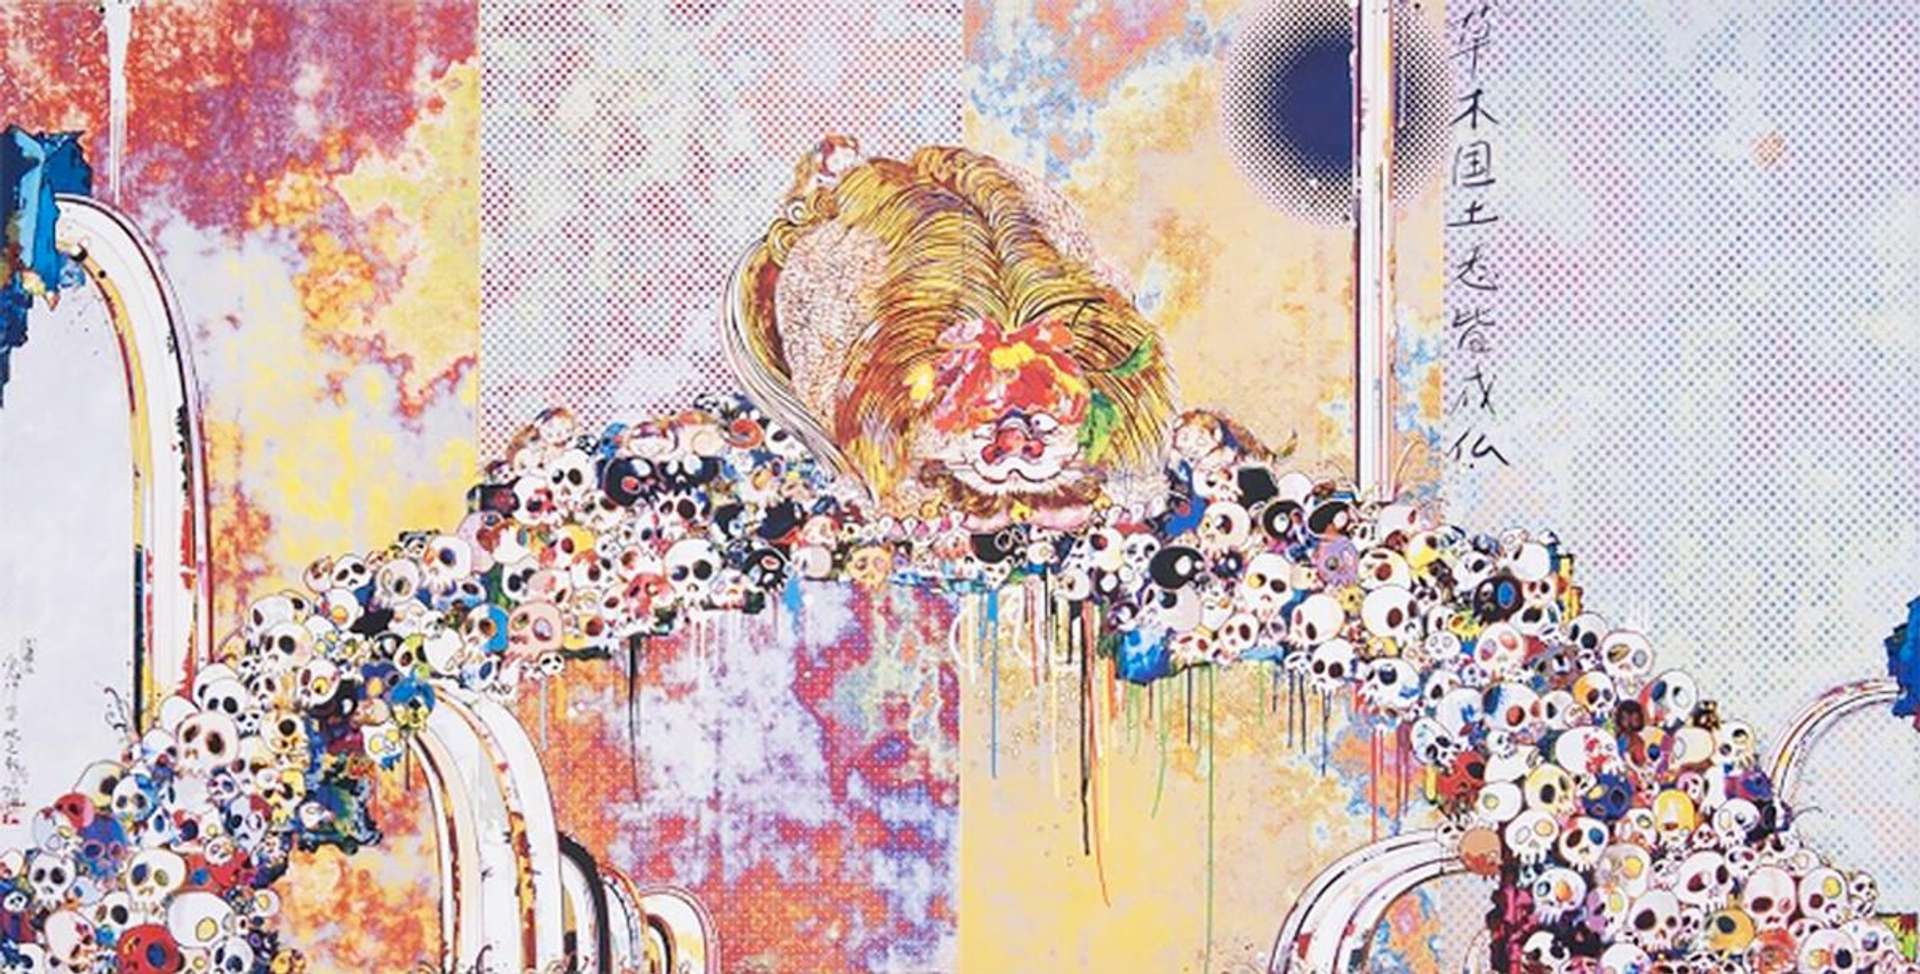 Of Chinese Lions Peonies Skulls And Fountains - Signed Print by Takashi Murakami 2012 - MyArtBroker